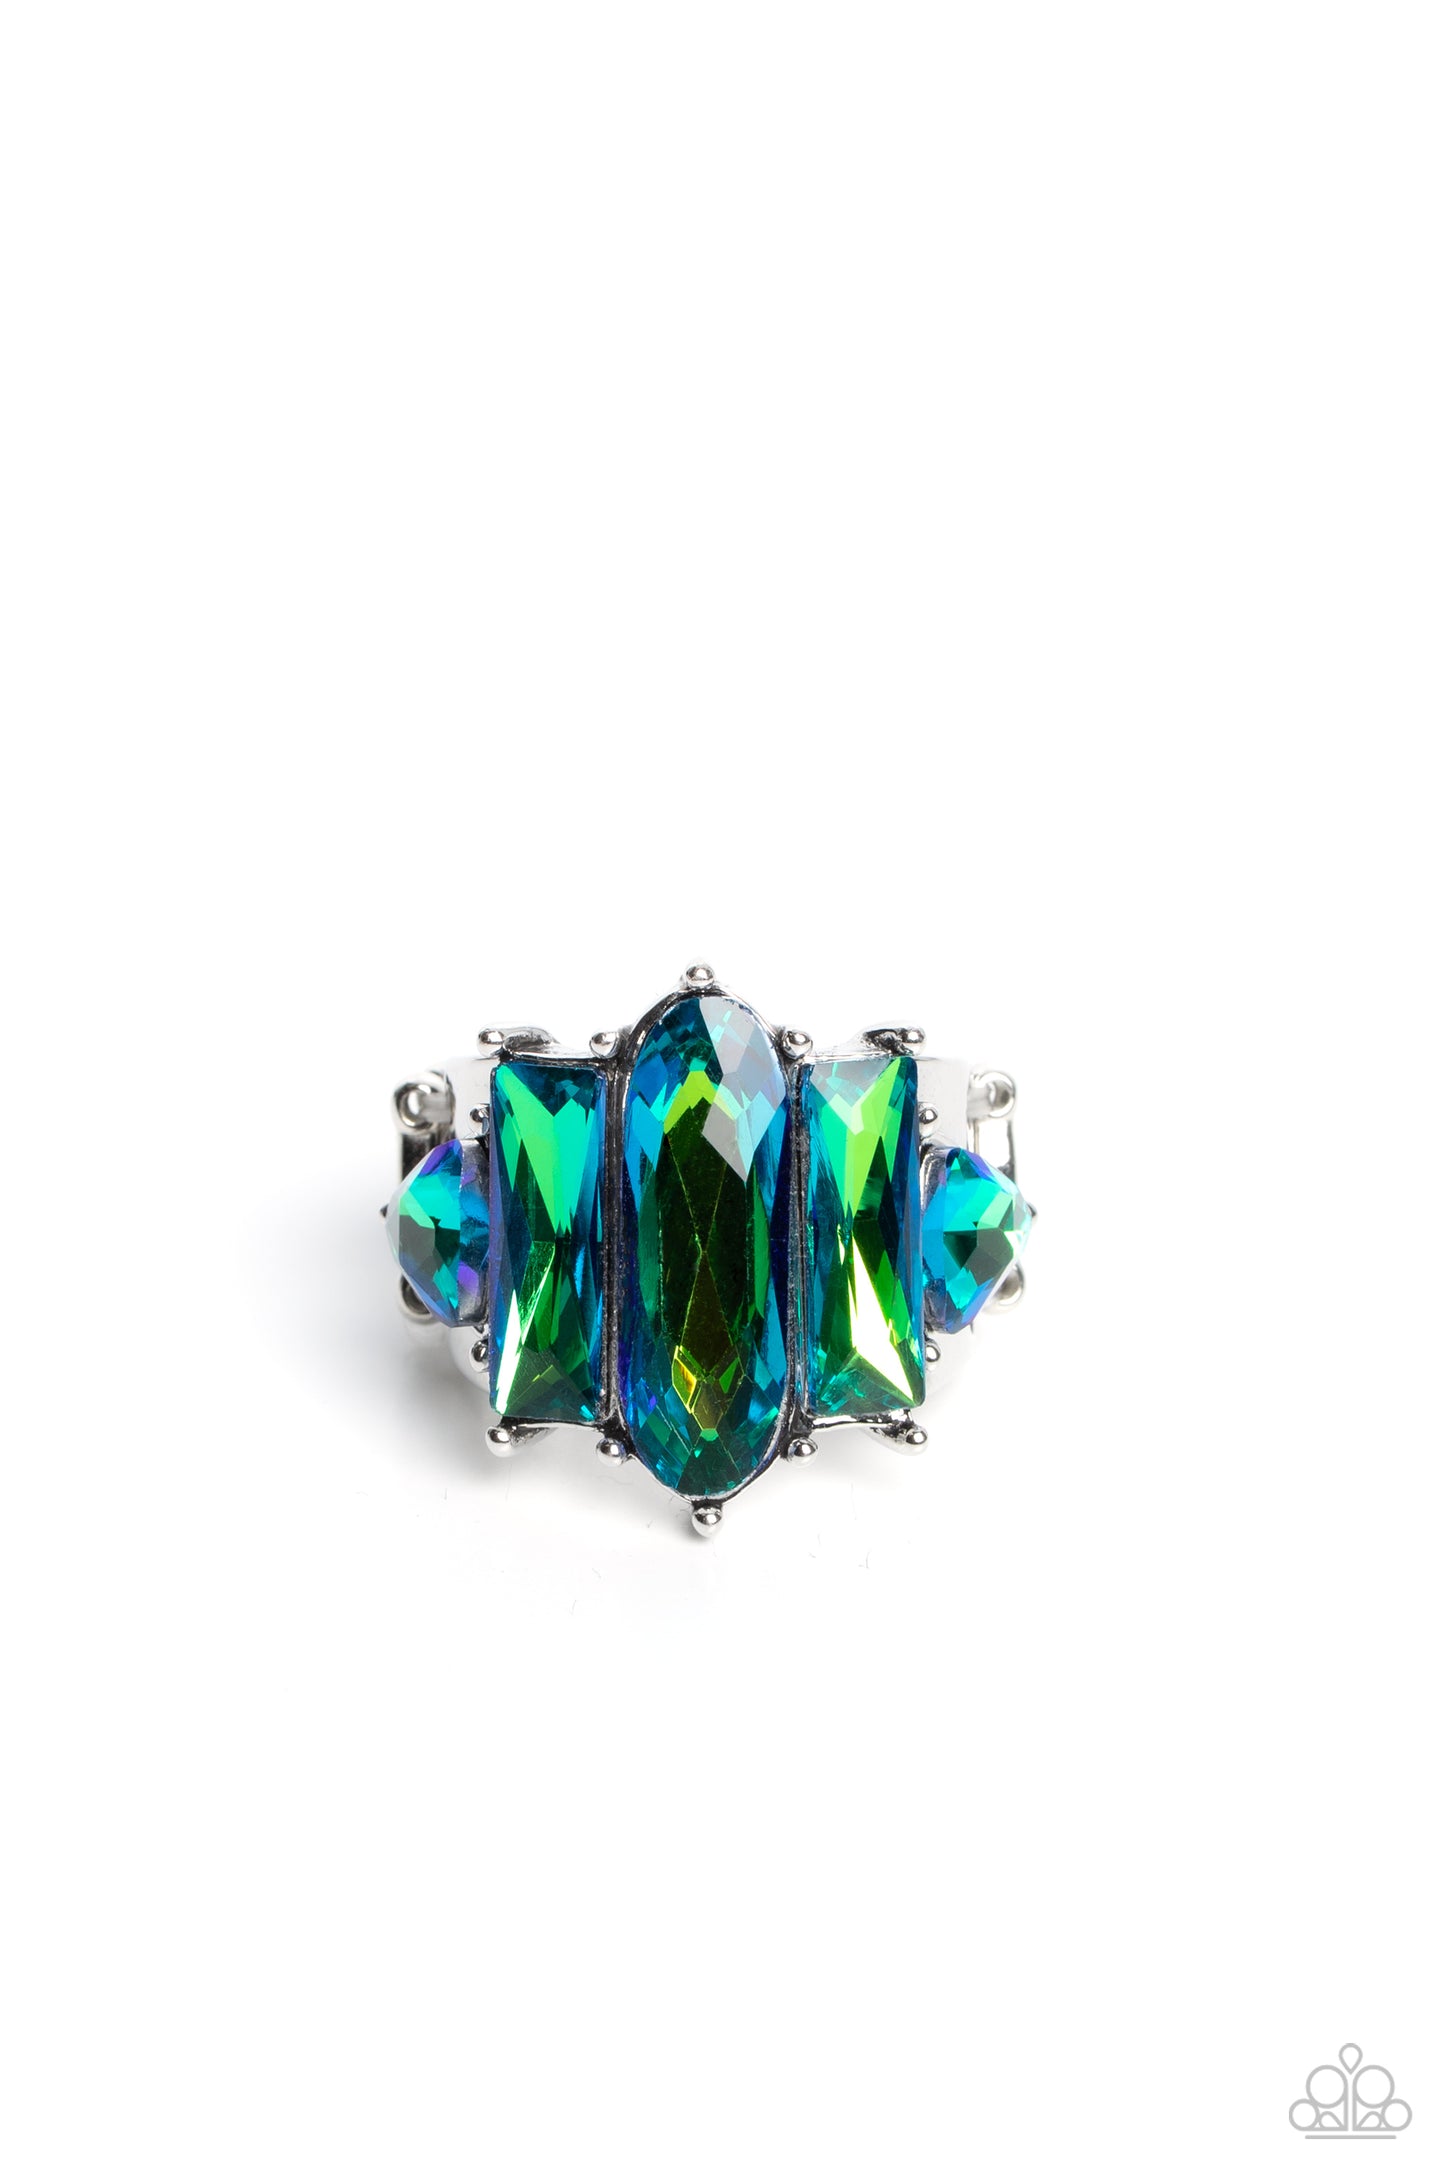 Paparazzi Accessories Iridescently Interstellar - Green Featuring a stellar UV finish, an iridescent collection of triangular, emerald, and oval cut green rhinestones are encrusted across the center of a thick silver band for an out-of-this-world fashion.